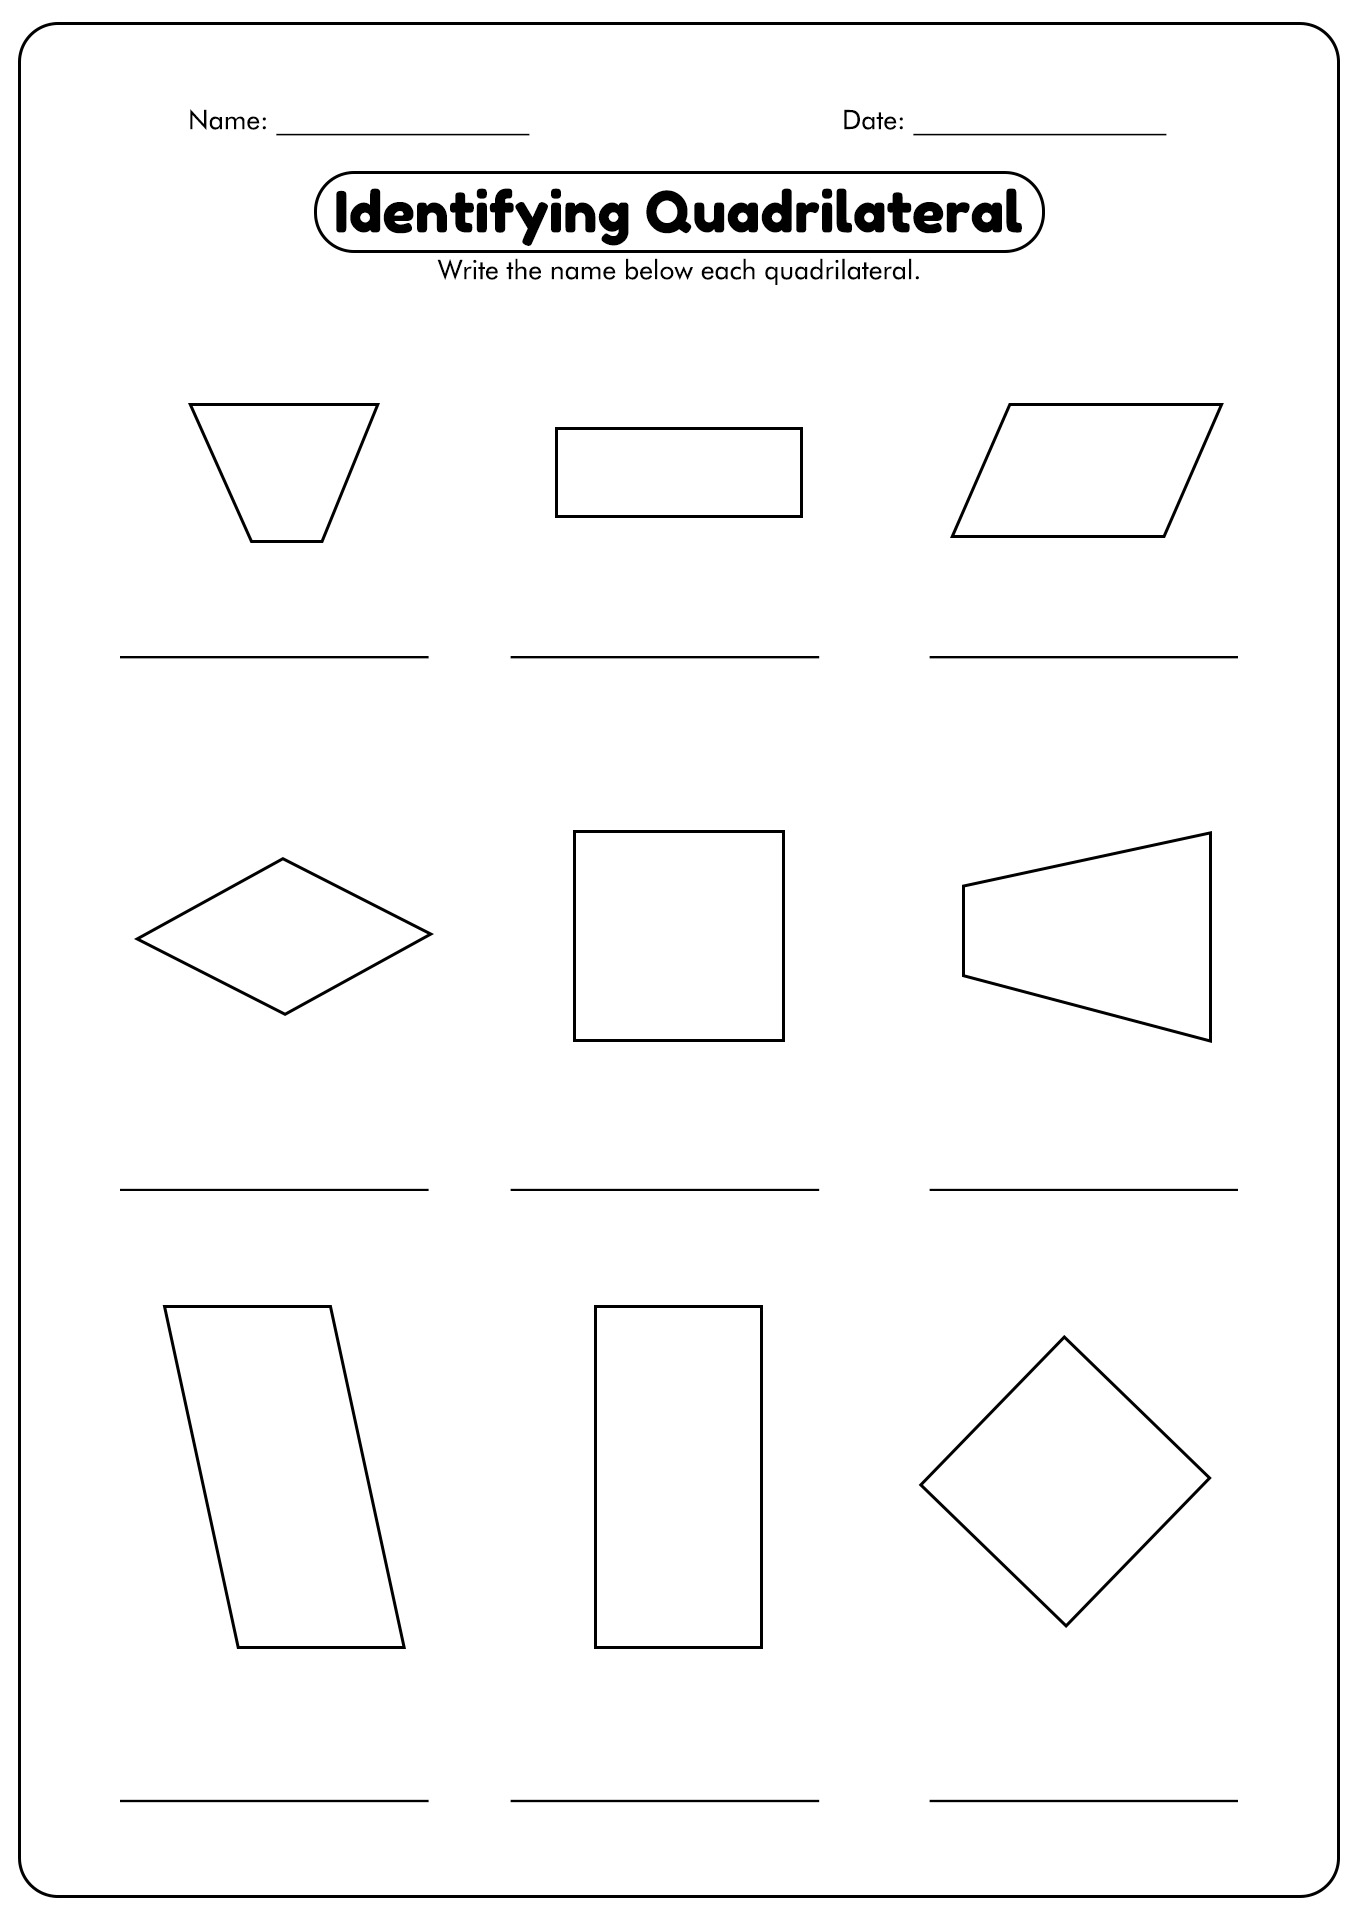 types-of-quadrilaterals-worksheets